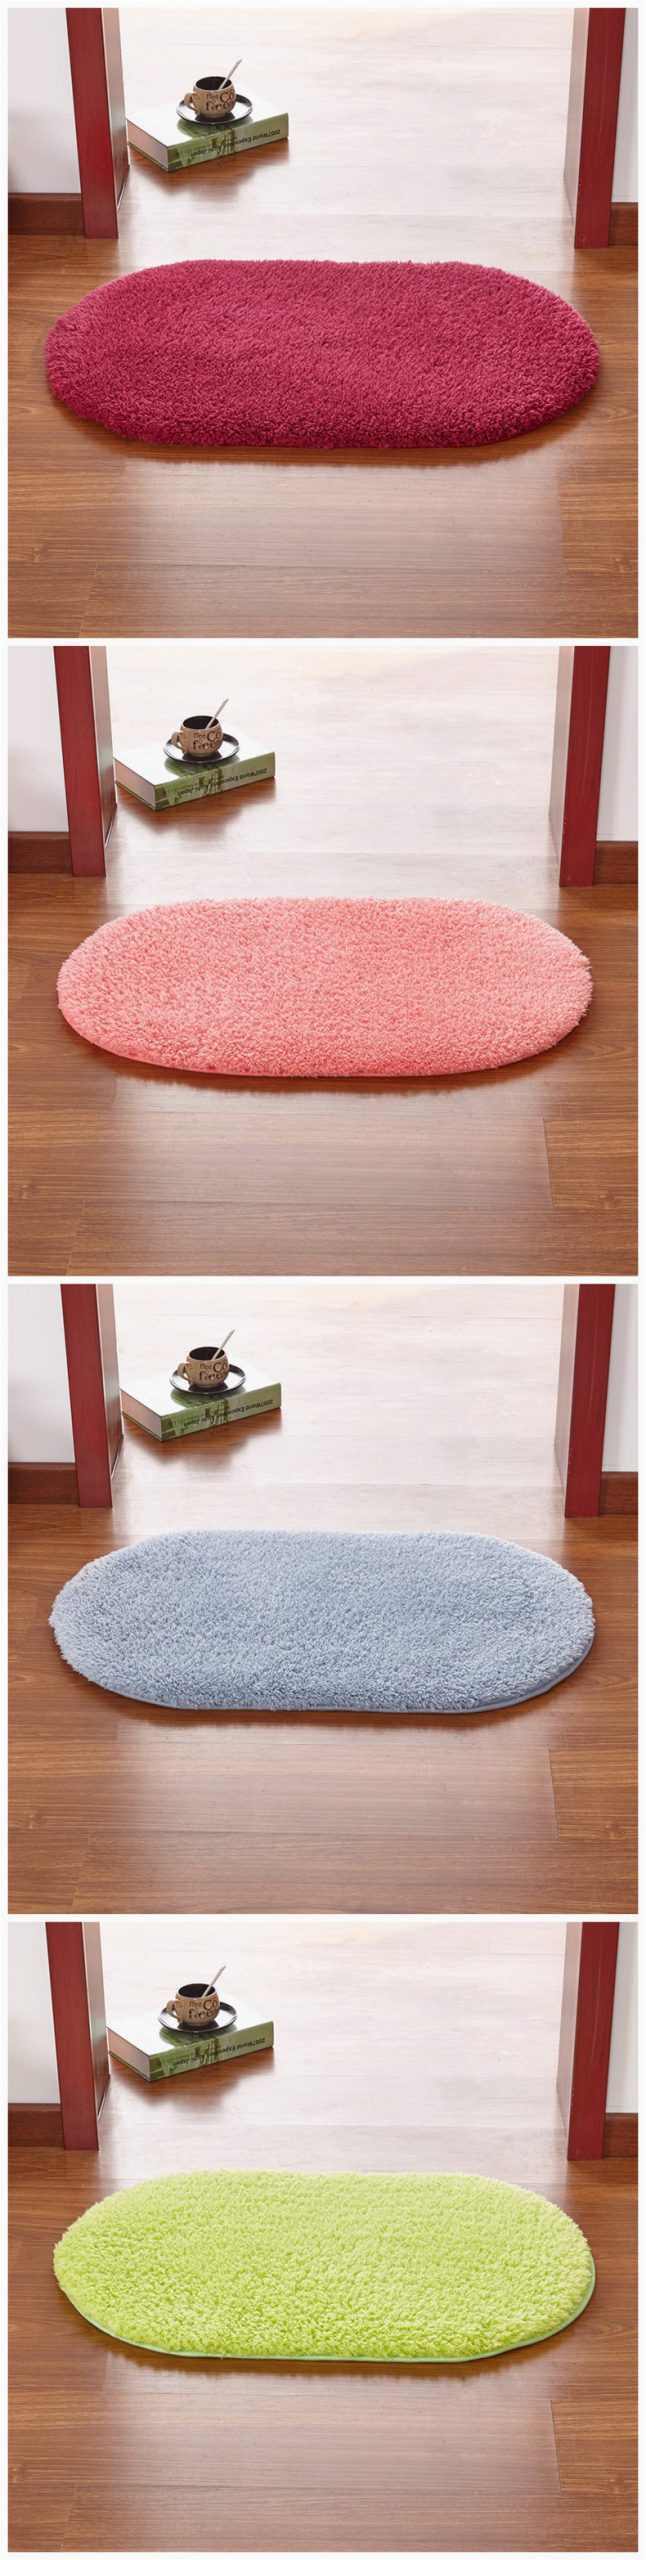 Heating Pad for Under area Rugs 50 80 60 90cm Home Decor Floor Mat Carpet Warm Foot Pad Long Hair Shaggy area Rugs for Bedroom toilet Entrance Bathroom Doormat